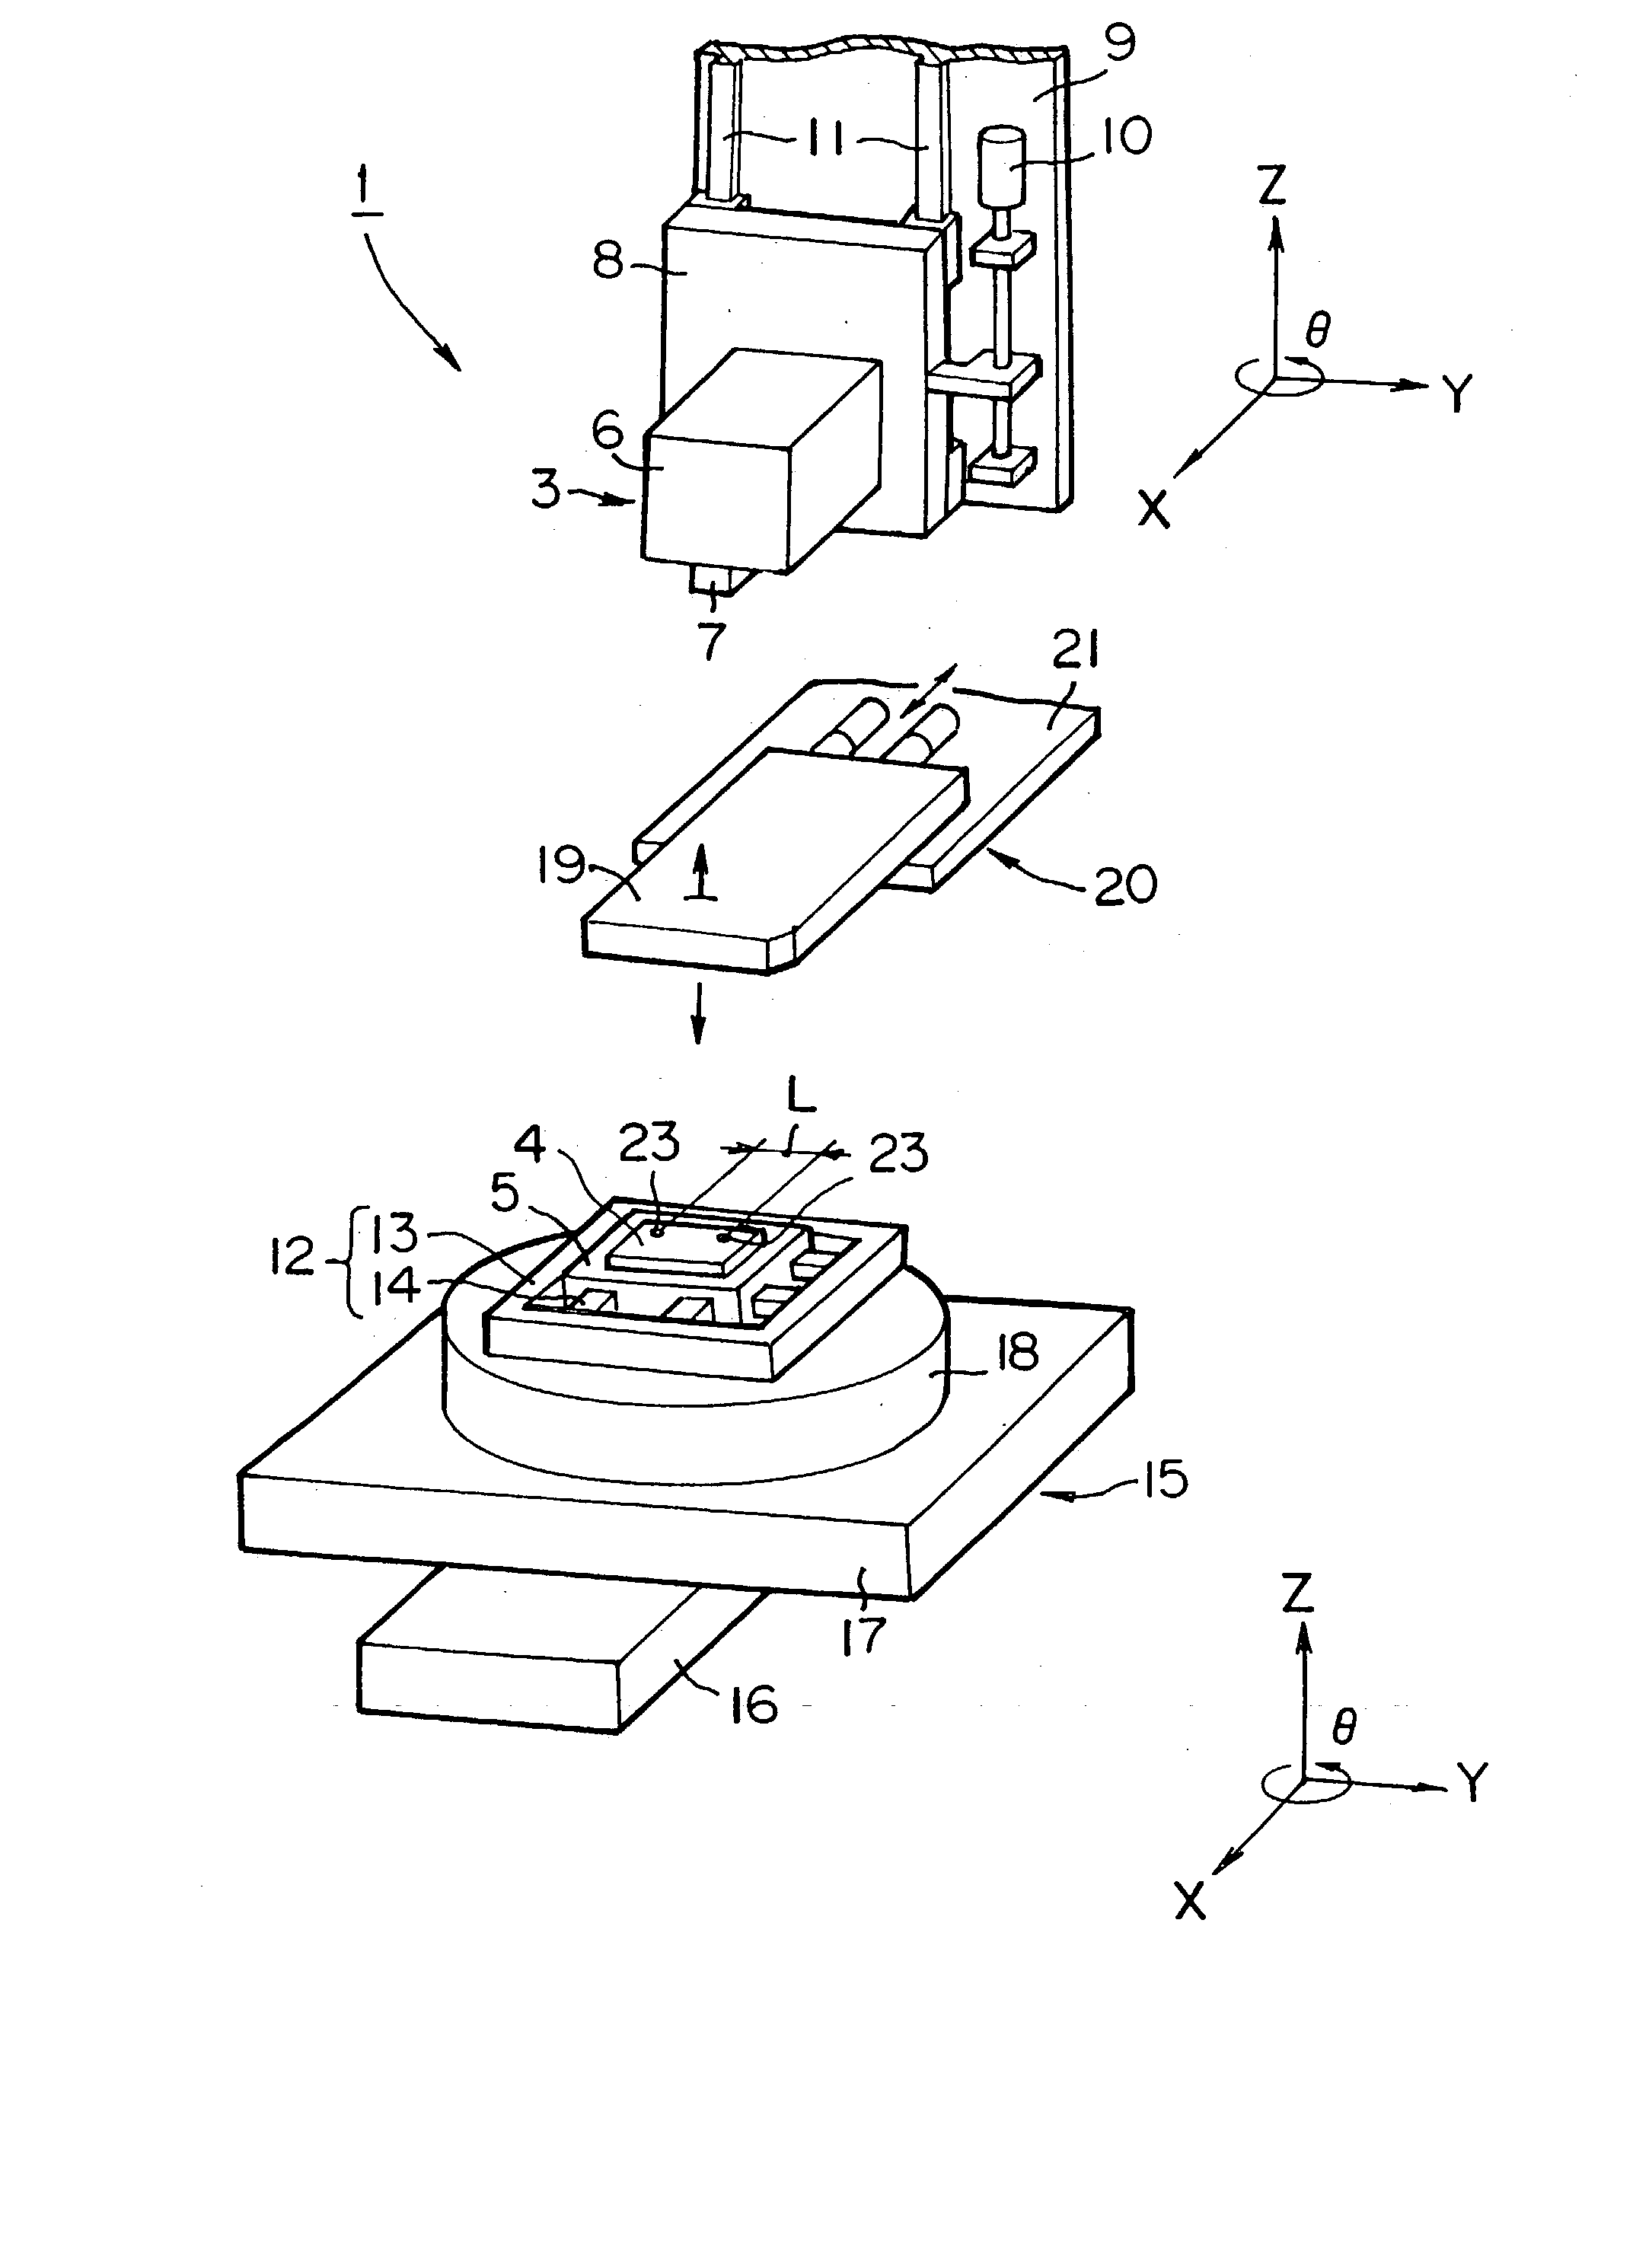 Chip-mounting device and method of alignment